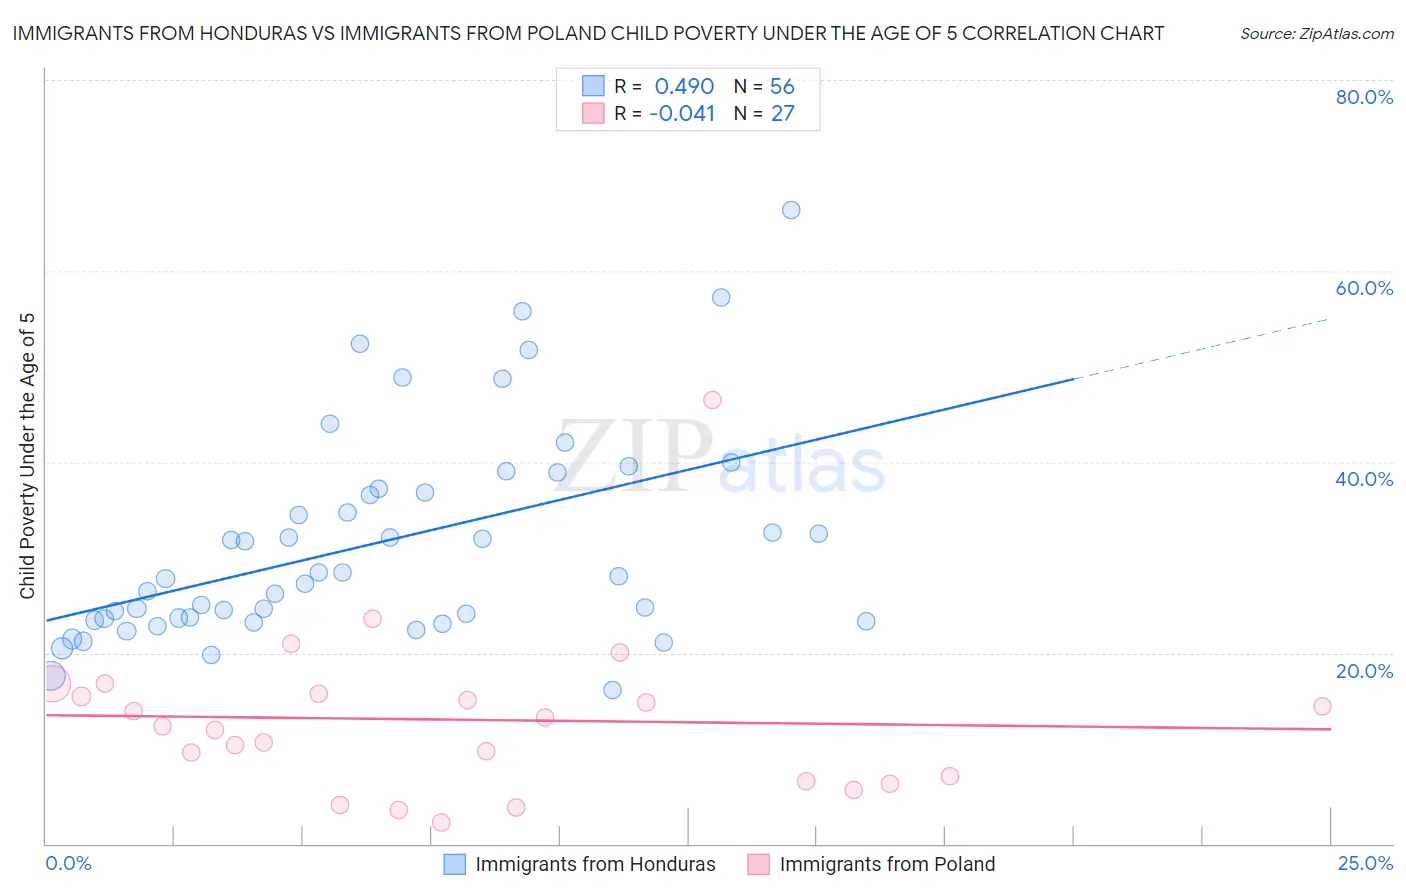 Immigrants from Honduras vs Immigrants from Poland Child Poverty Under the Age of 5